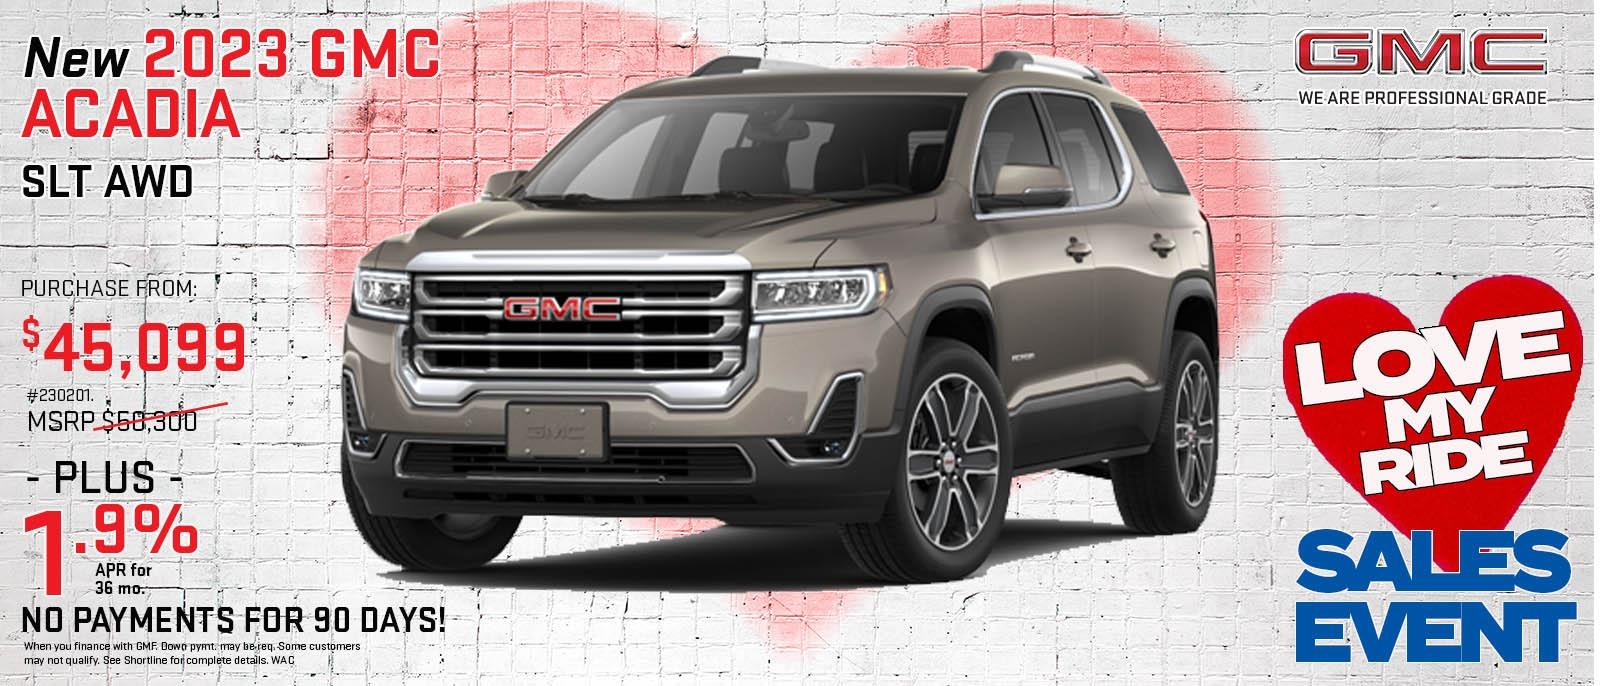 View the GMC Acadia Special in Denver at Shortline